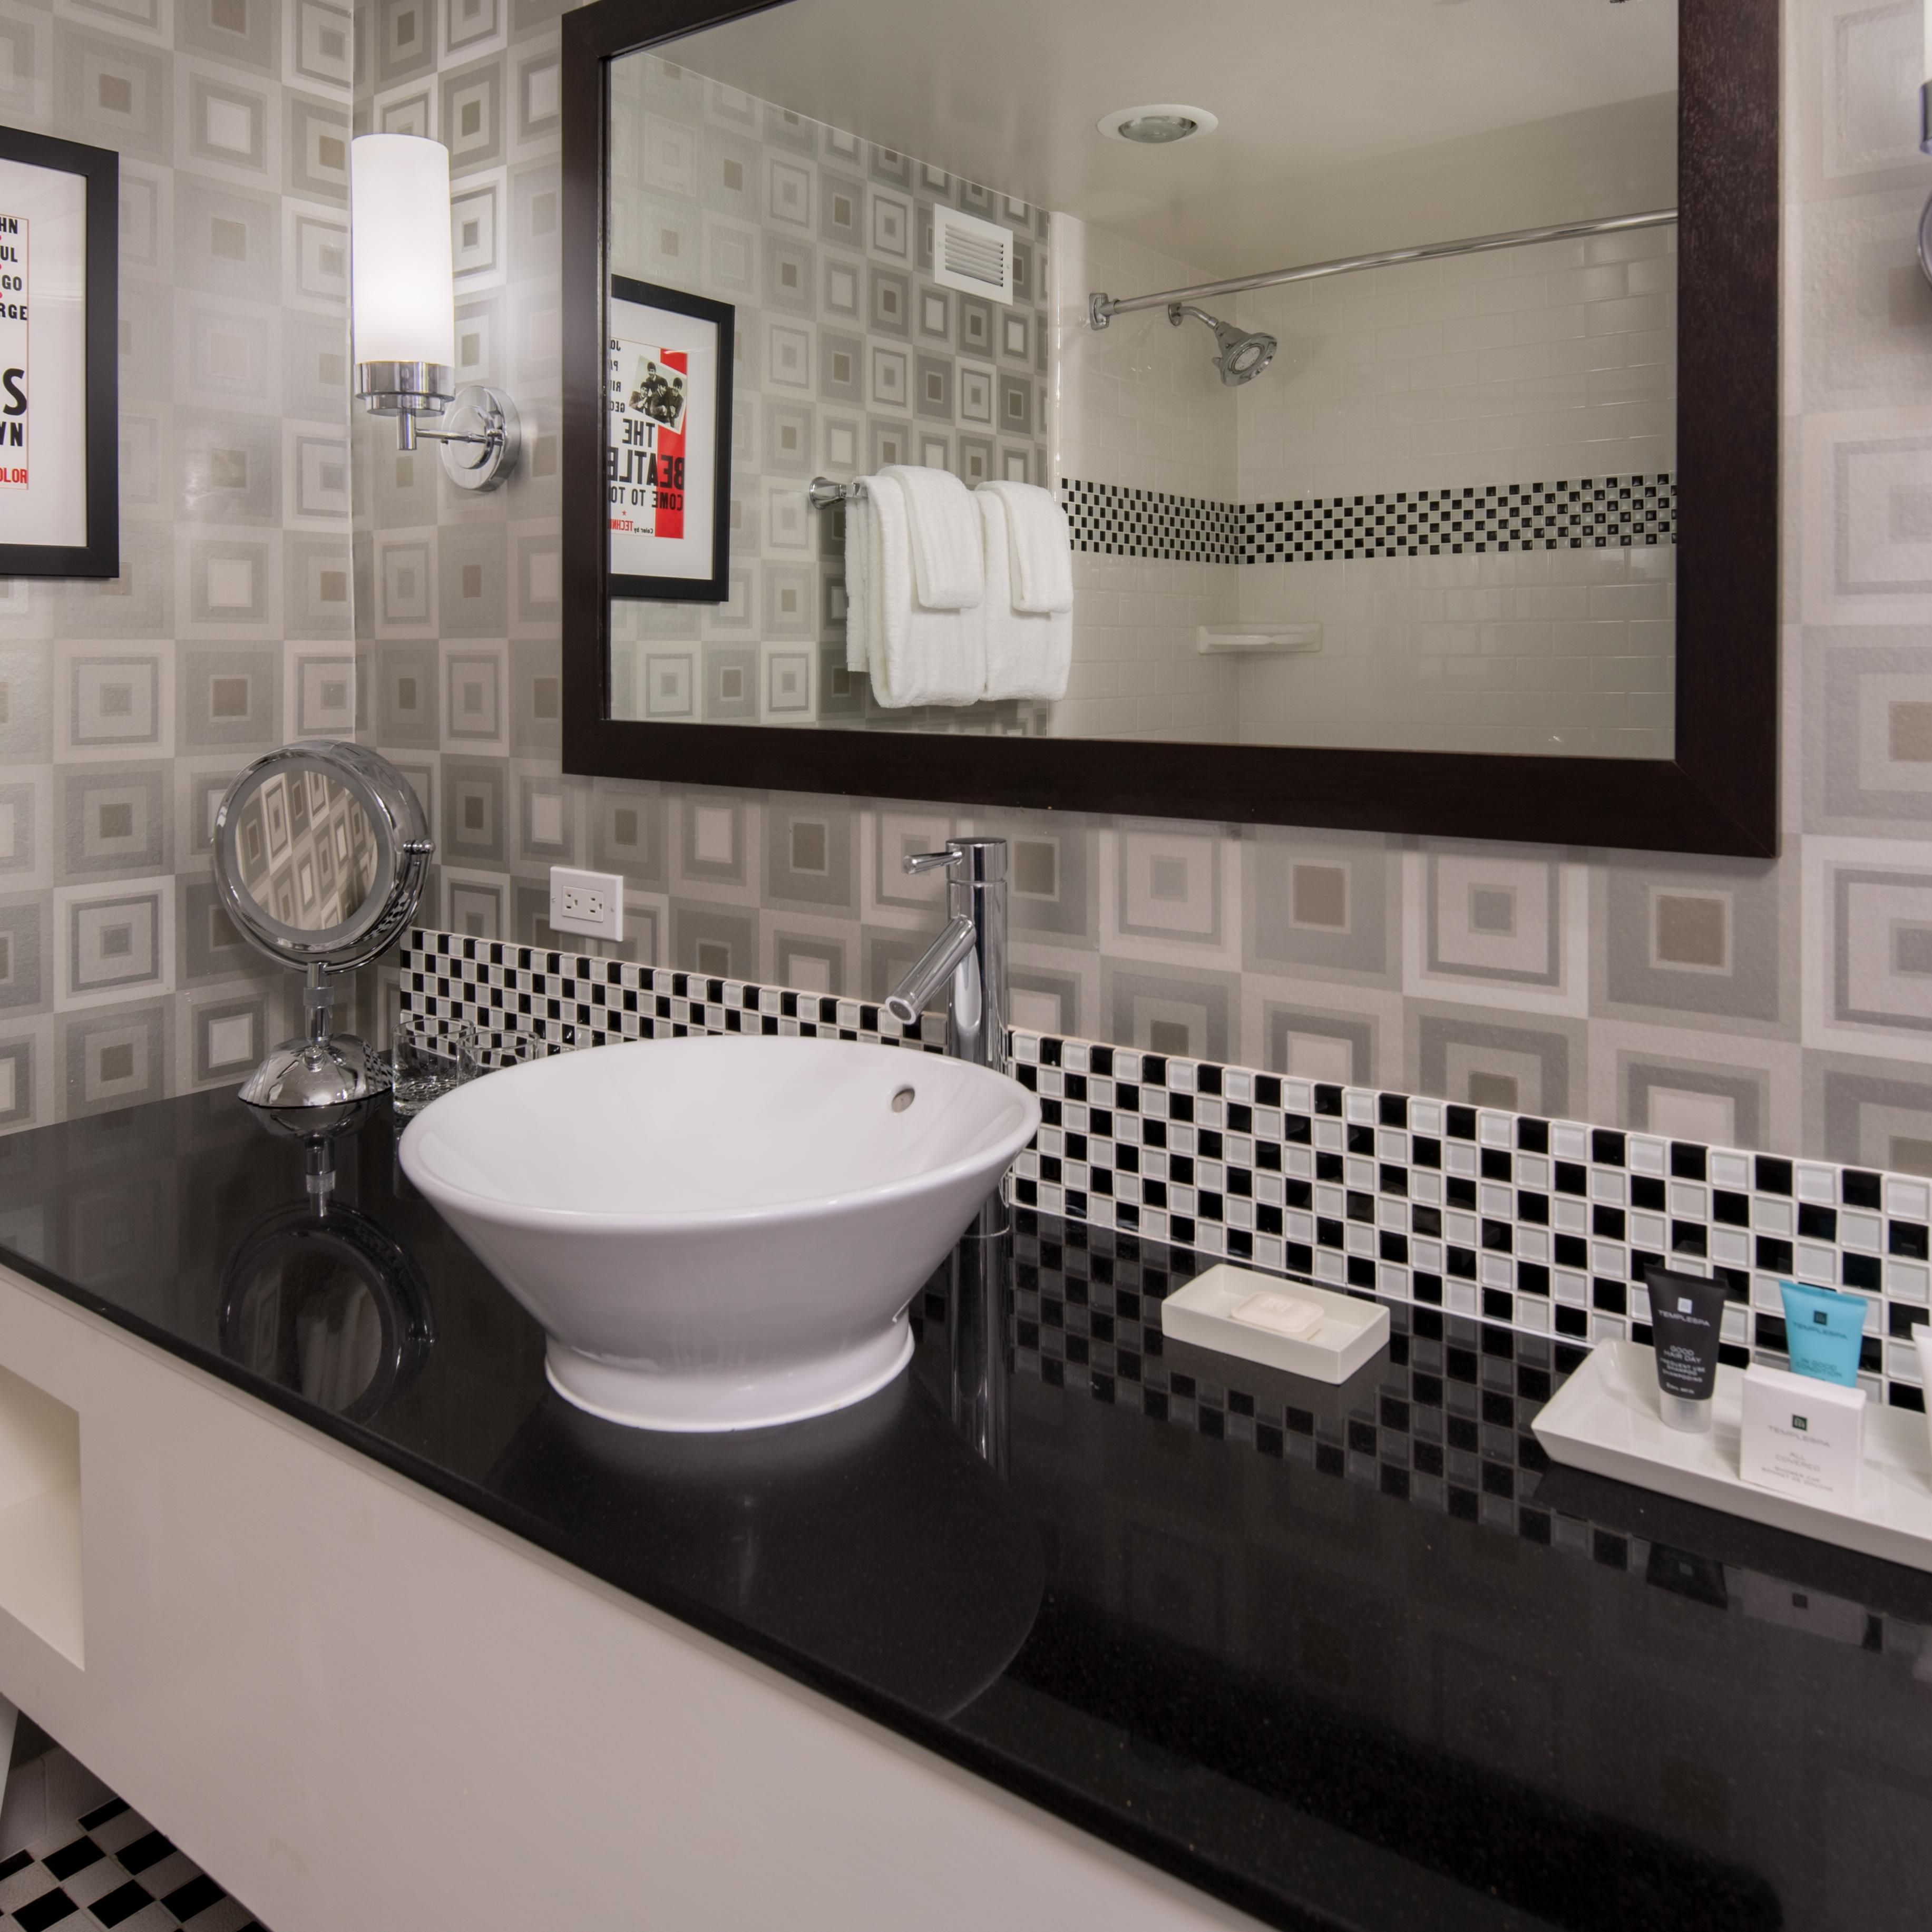 Follow in the Beatles footsteps and enjoy the large Suite bathroom